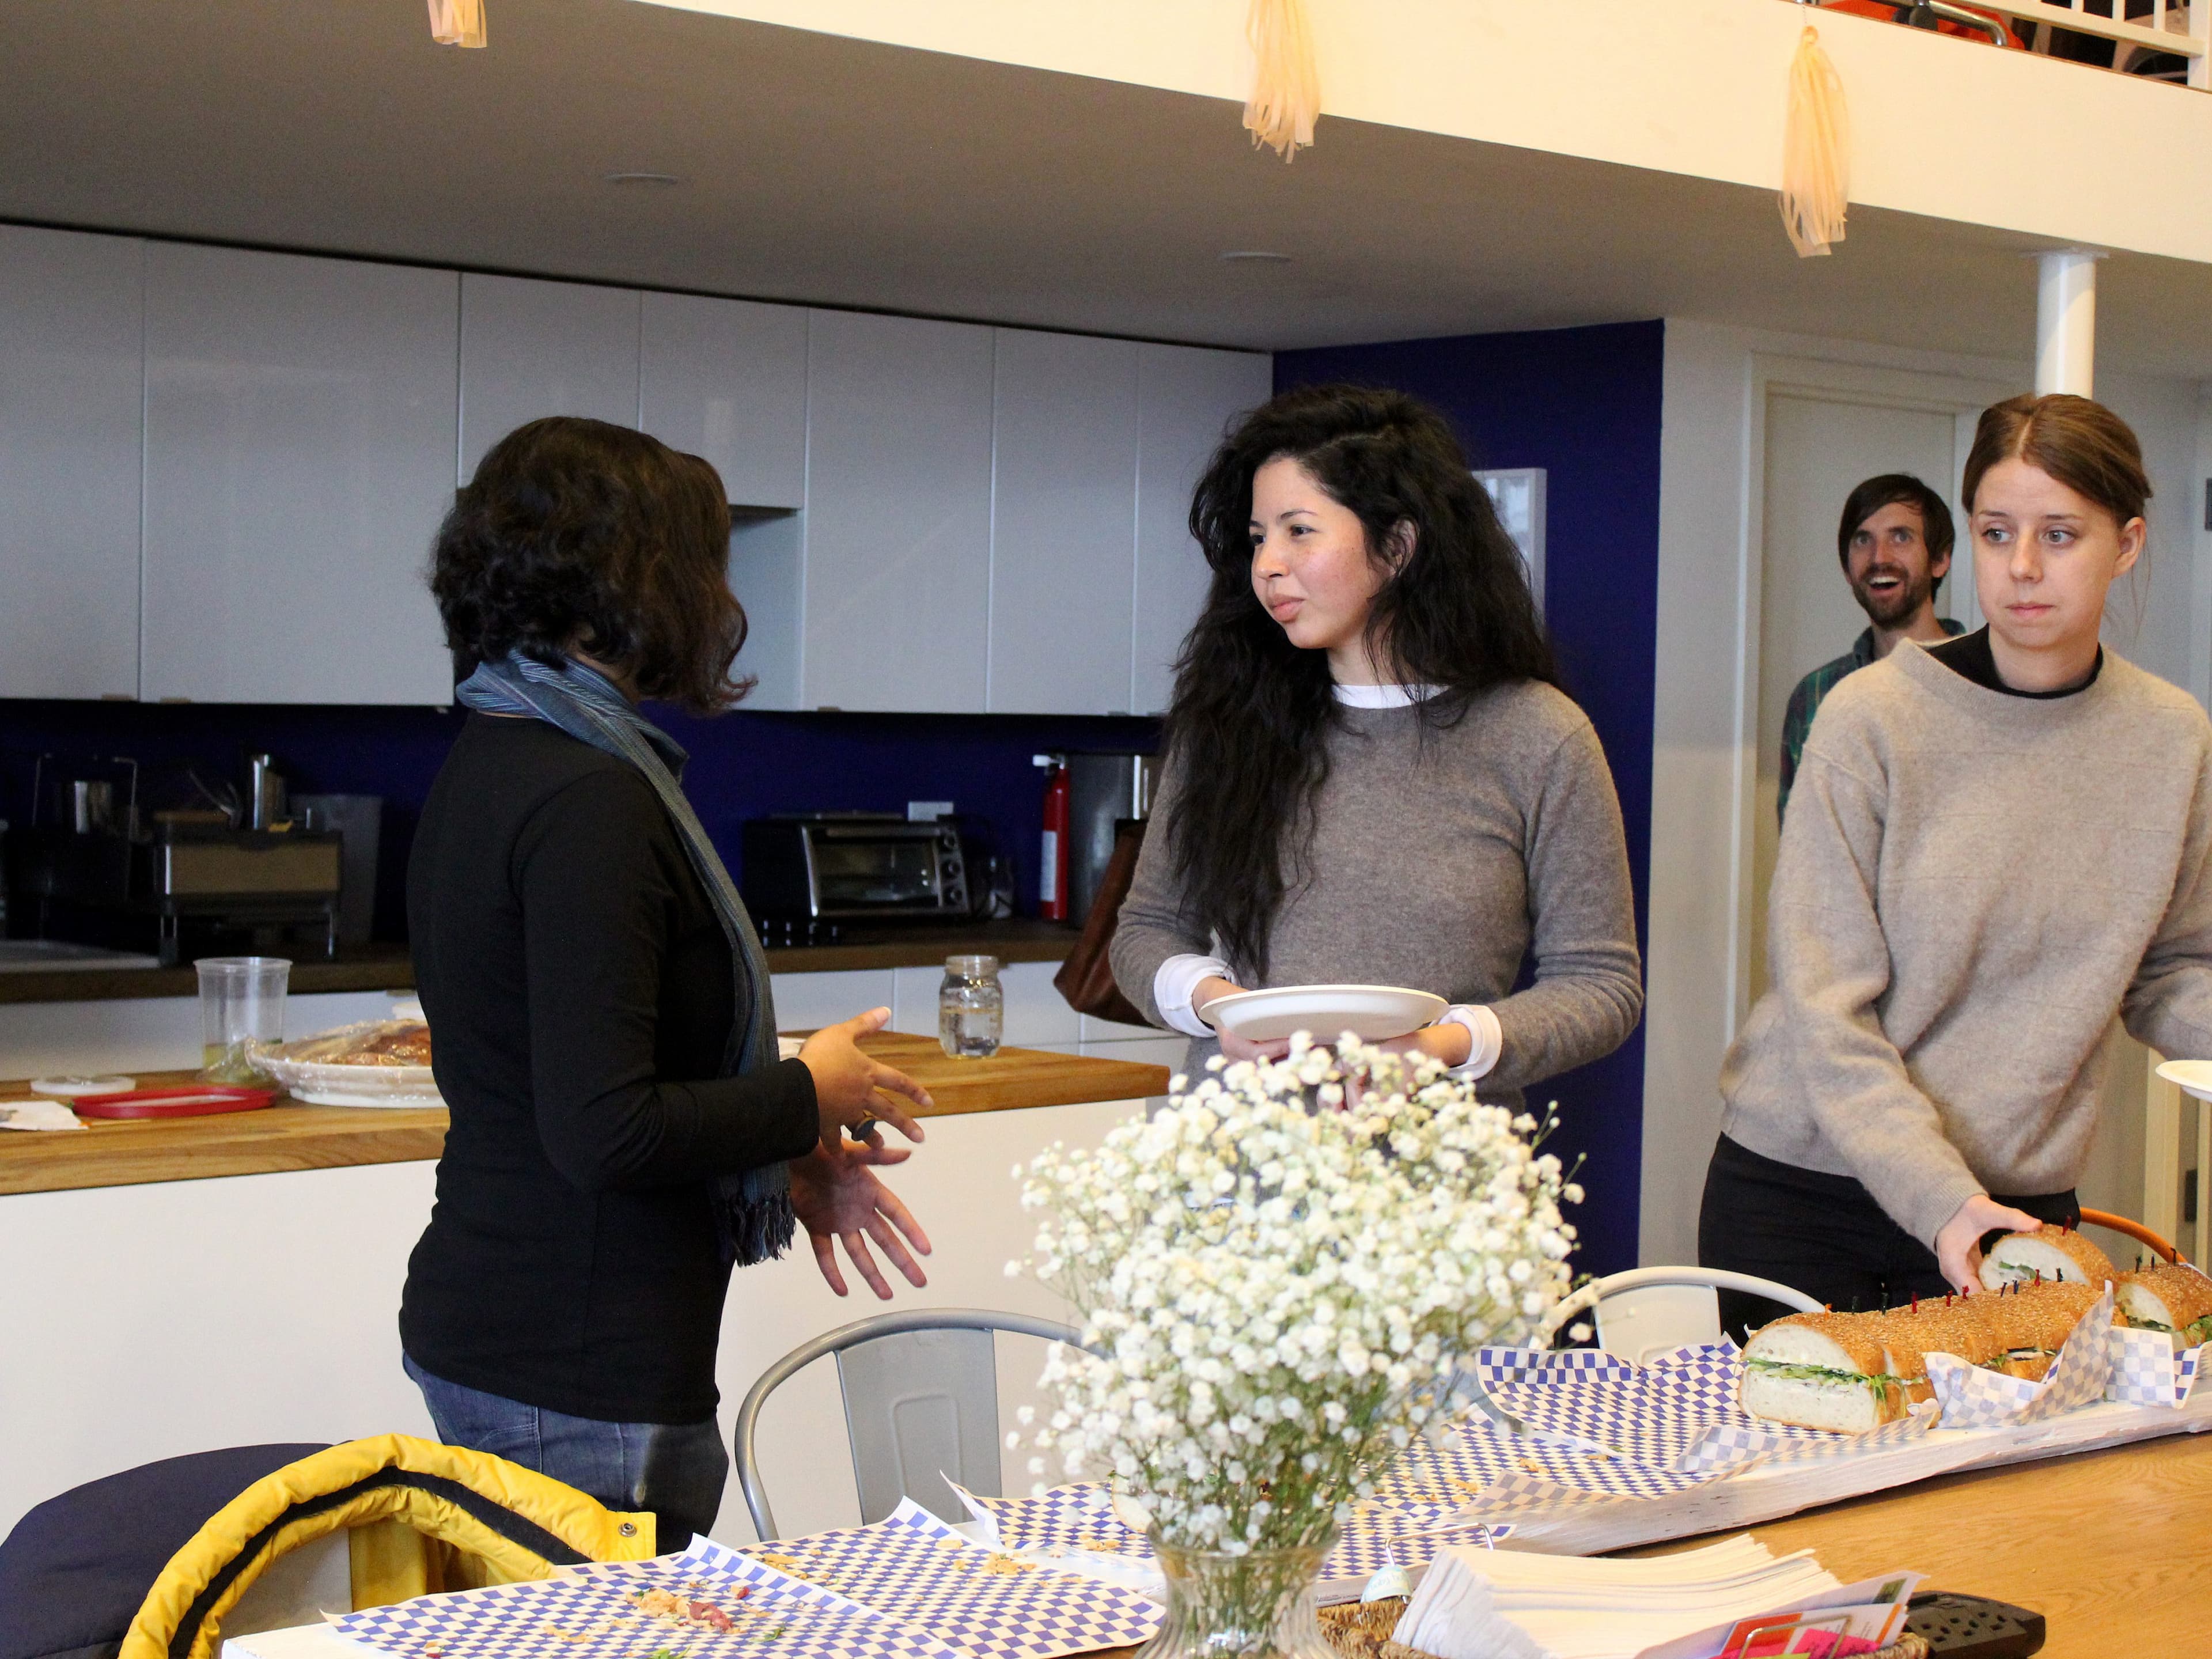 Three people are gathered in a kitchen setting with a wooden countertop. Two women are in conversation, holding plates; a man is in the background near a staircase. On the counter are flowers and various food items, including sandwiches and snacks.